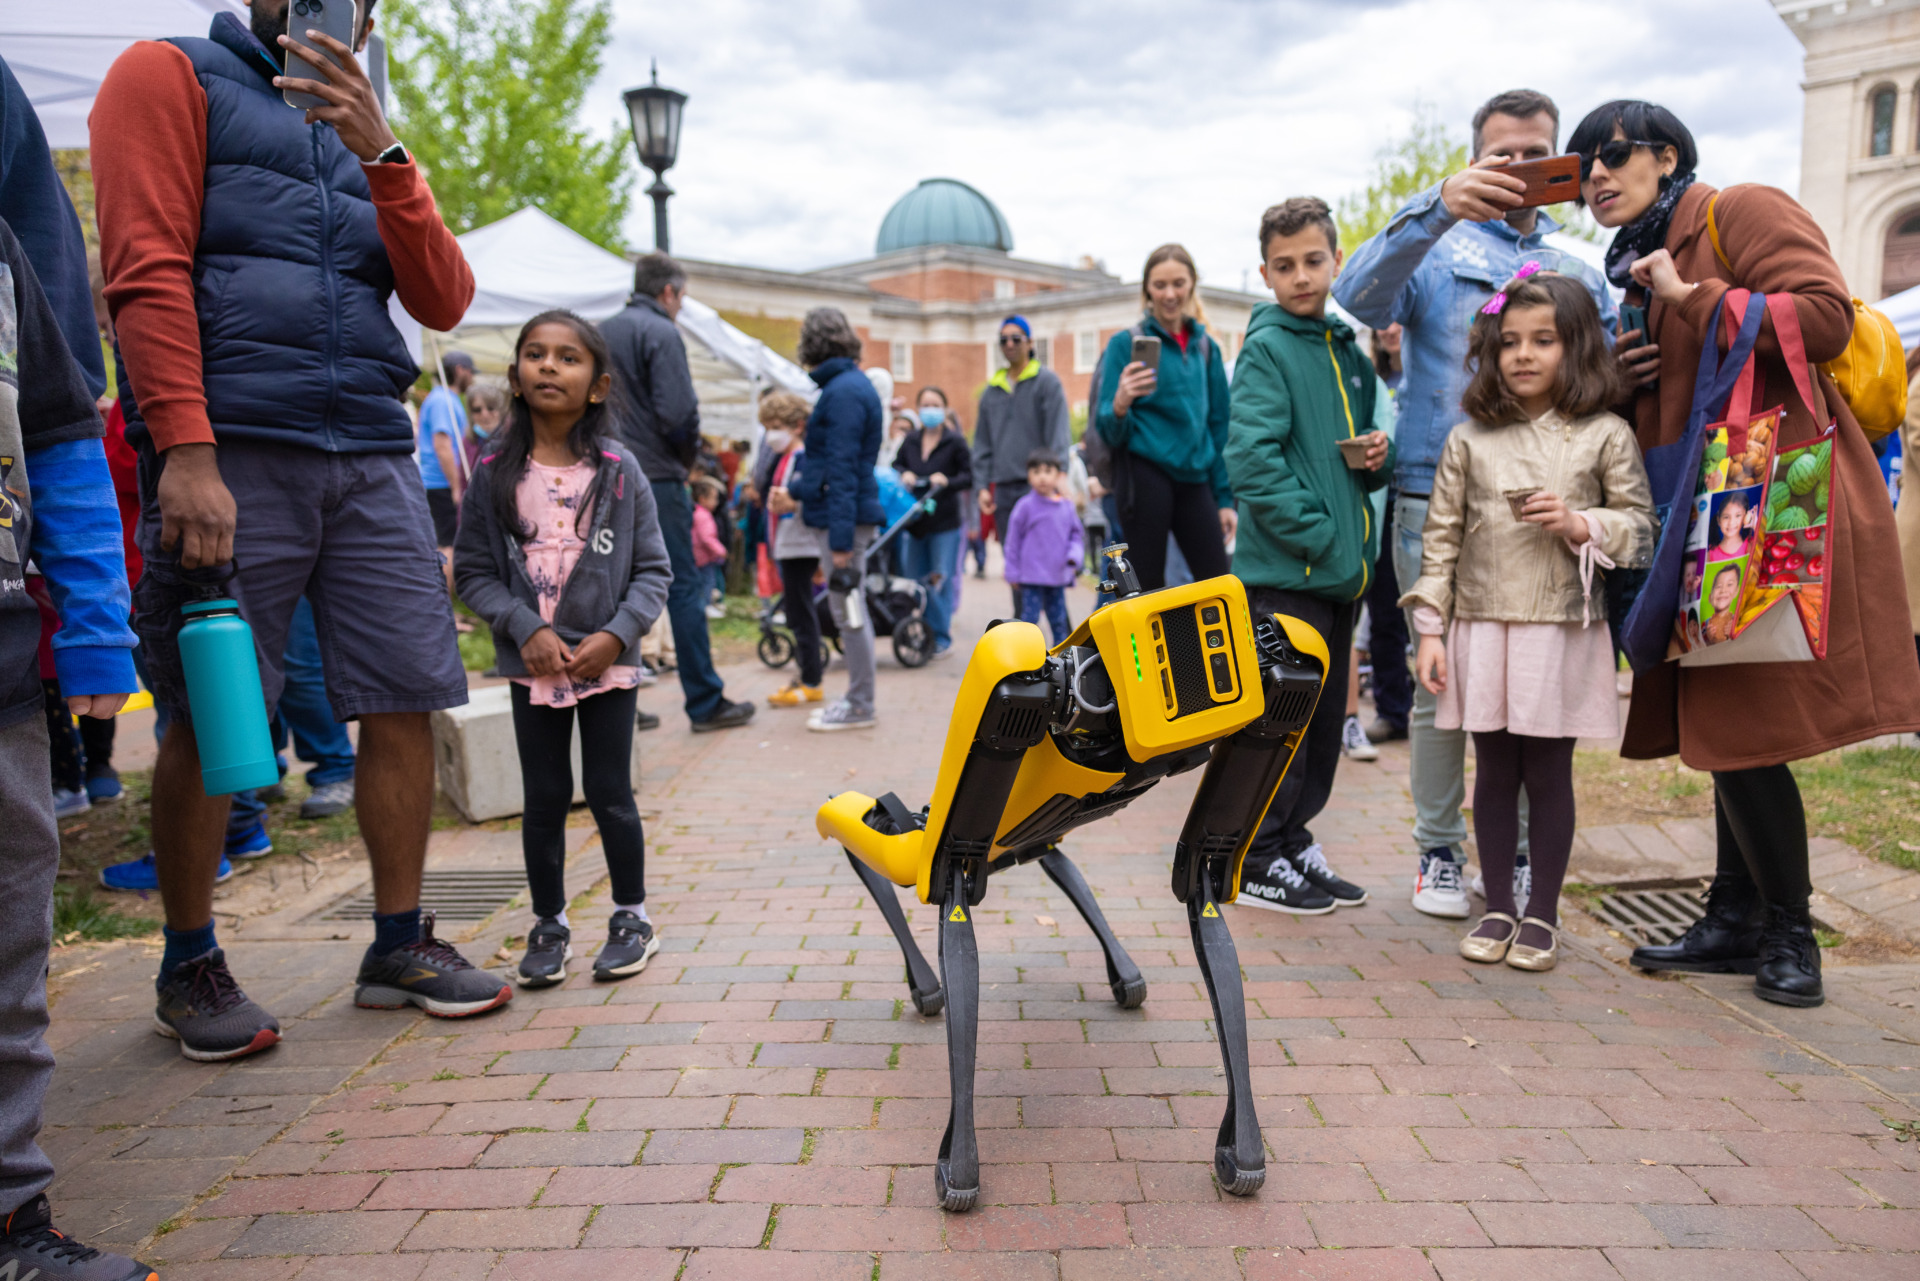 Spot, an agile mobile robot from Boston Dynamics wows the crowd Morehead Planetarium and Science Center as part of UNC Science Expo, Saturday, April 9, 2022.